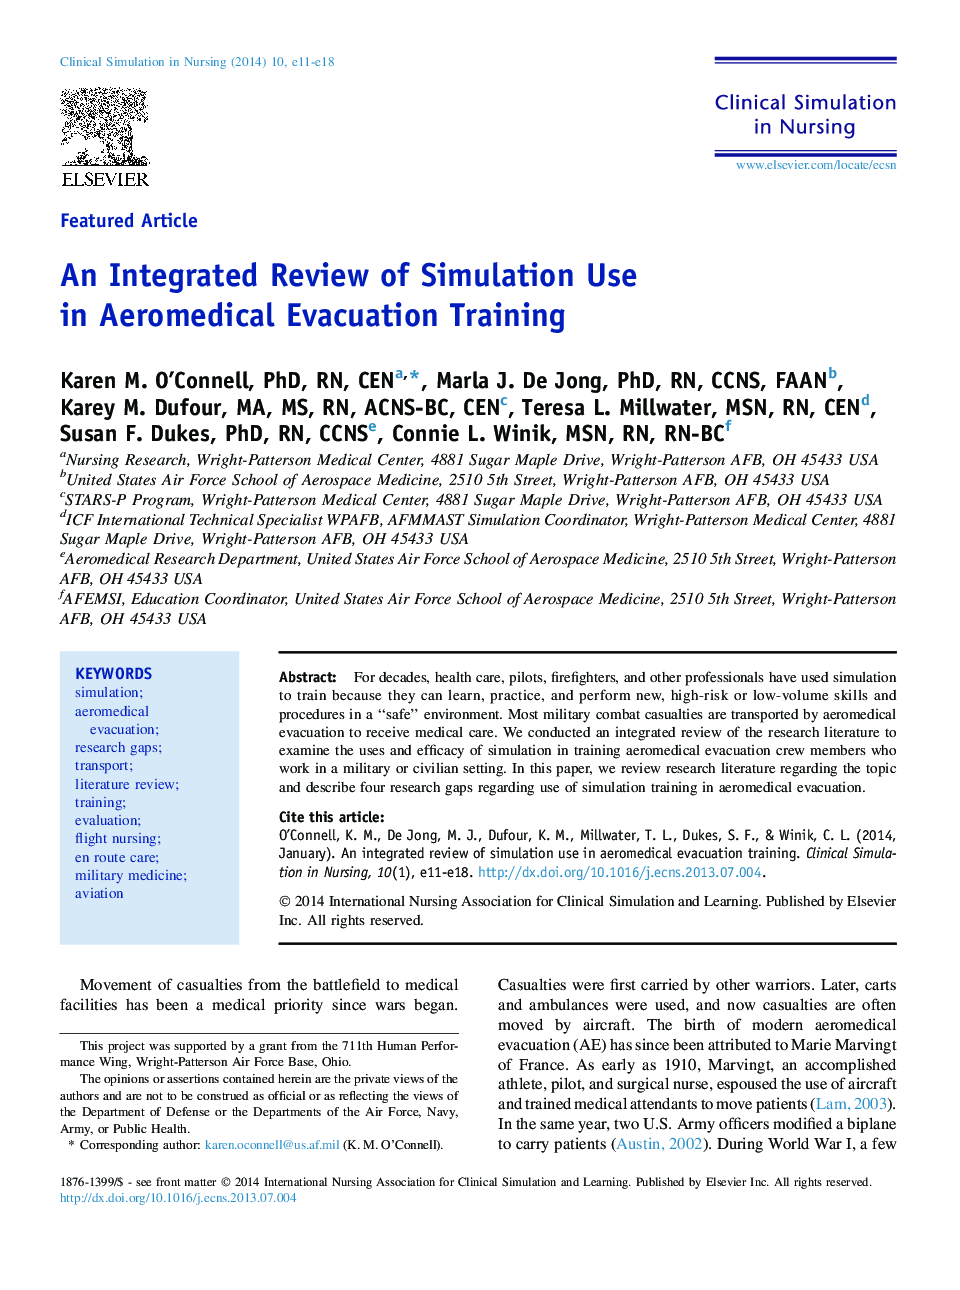 An Integrated Review of Simulation Use in Aeromedical Evacuation Training